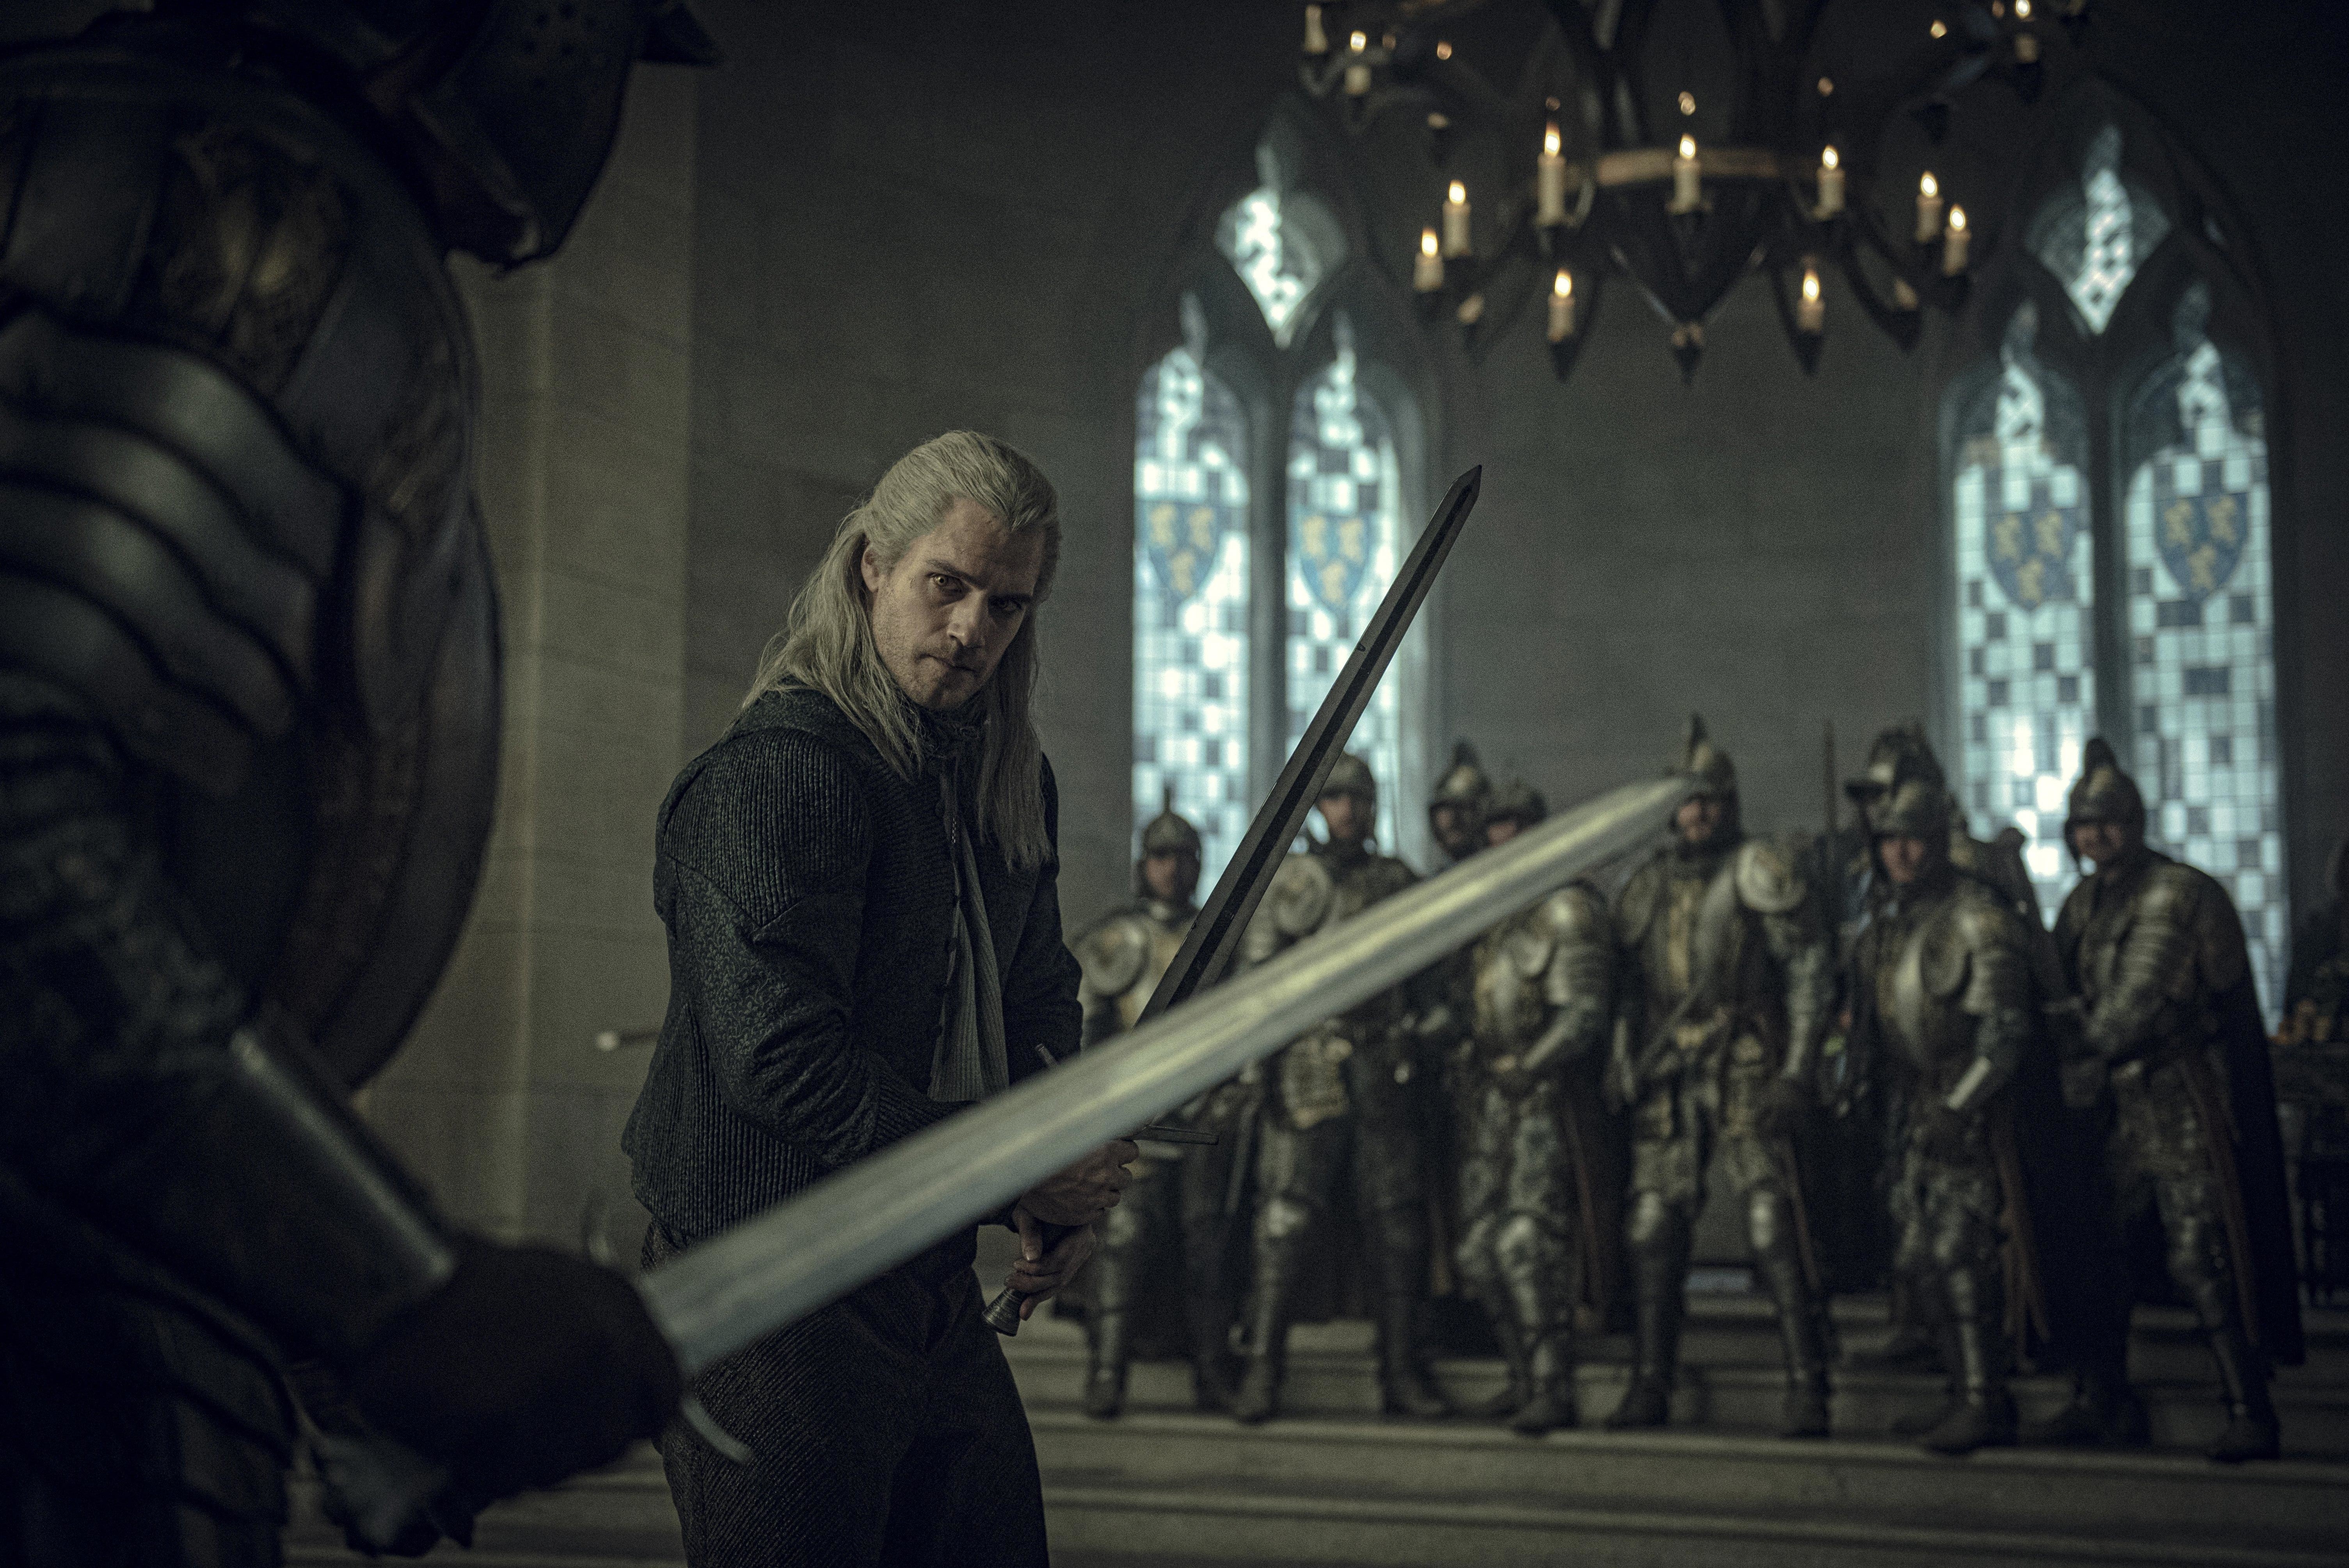 TV Show The Witcher HD Wallpaper | Background Image